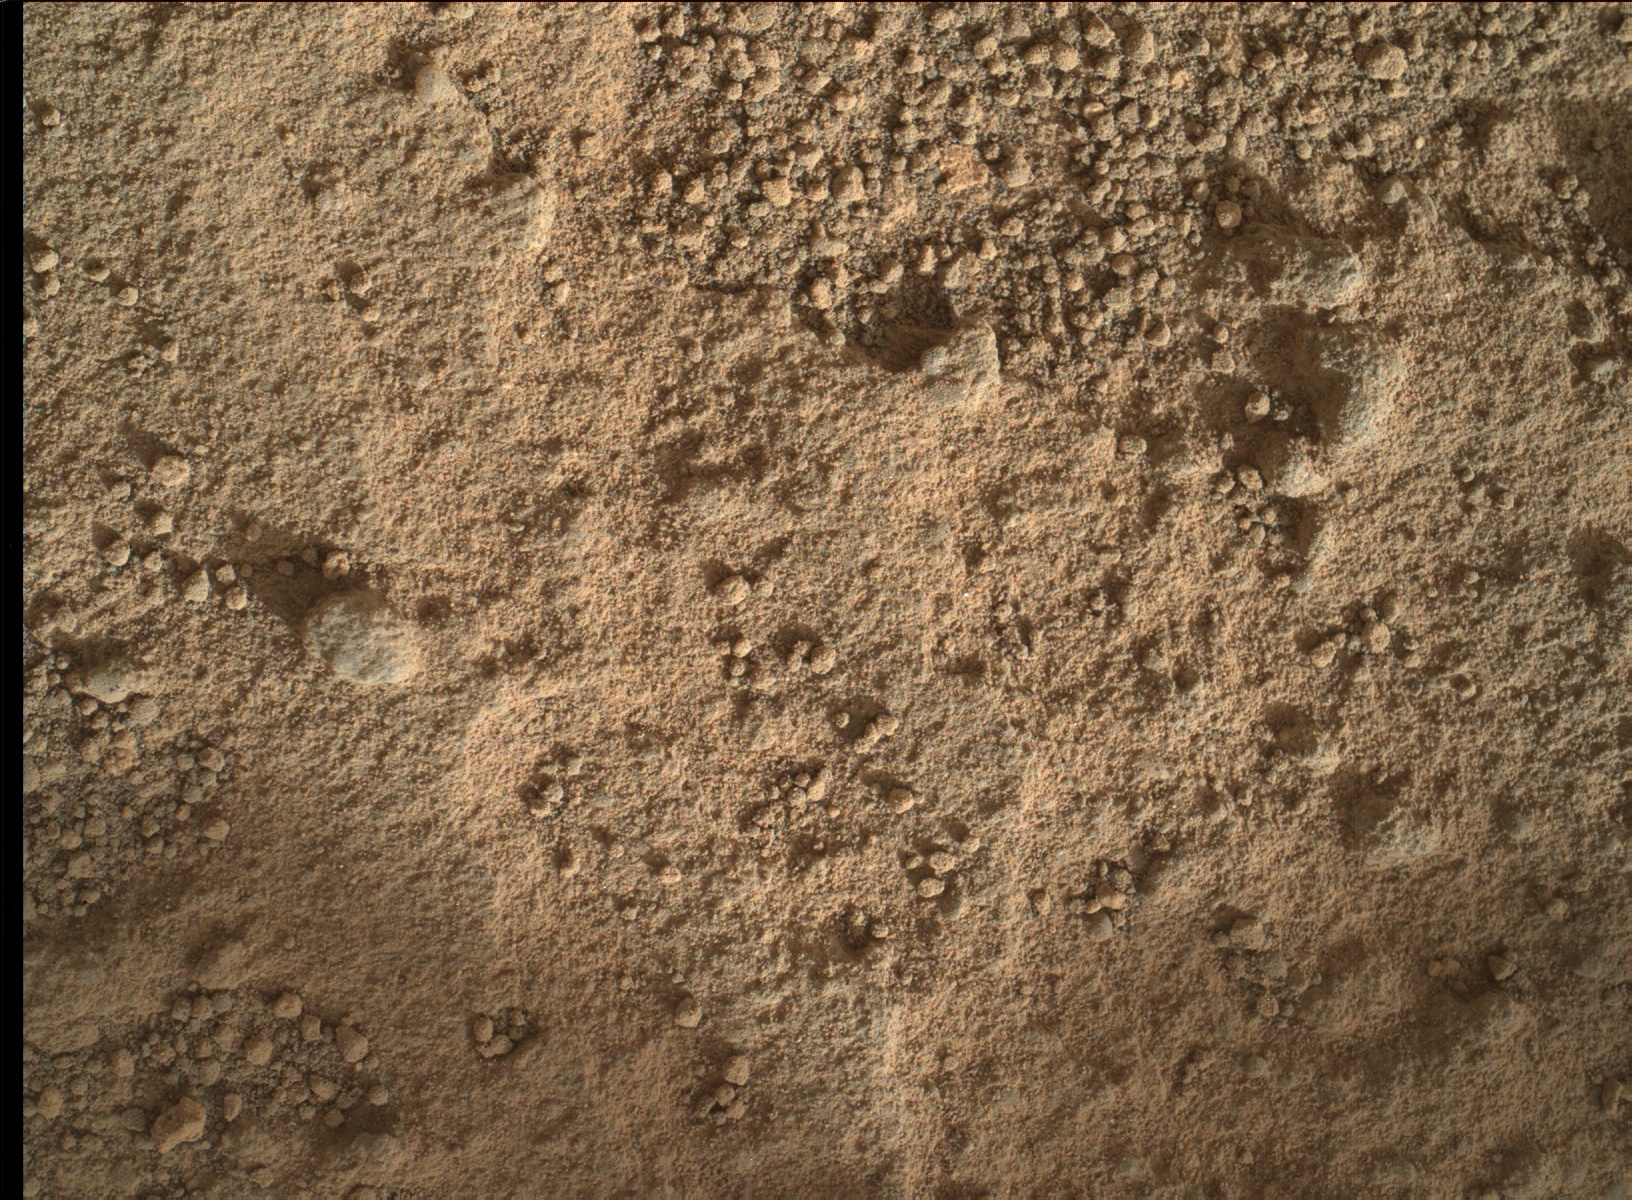 Nasa's Mars rover Curiosity acquired this image using its Mars Hand Lens Imager (MAHLI) on Sol 1351